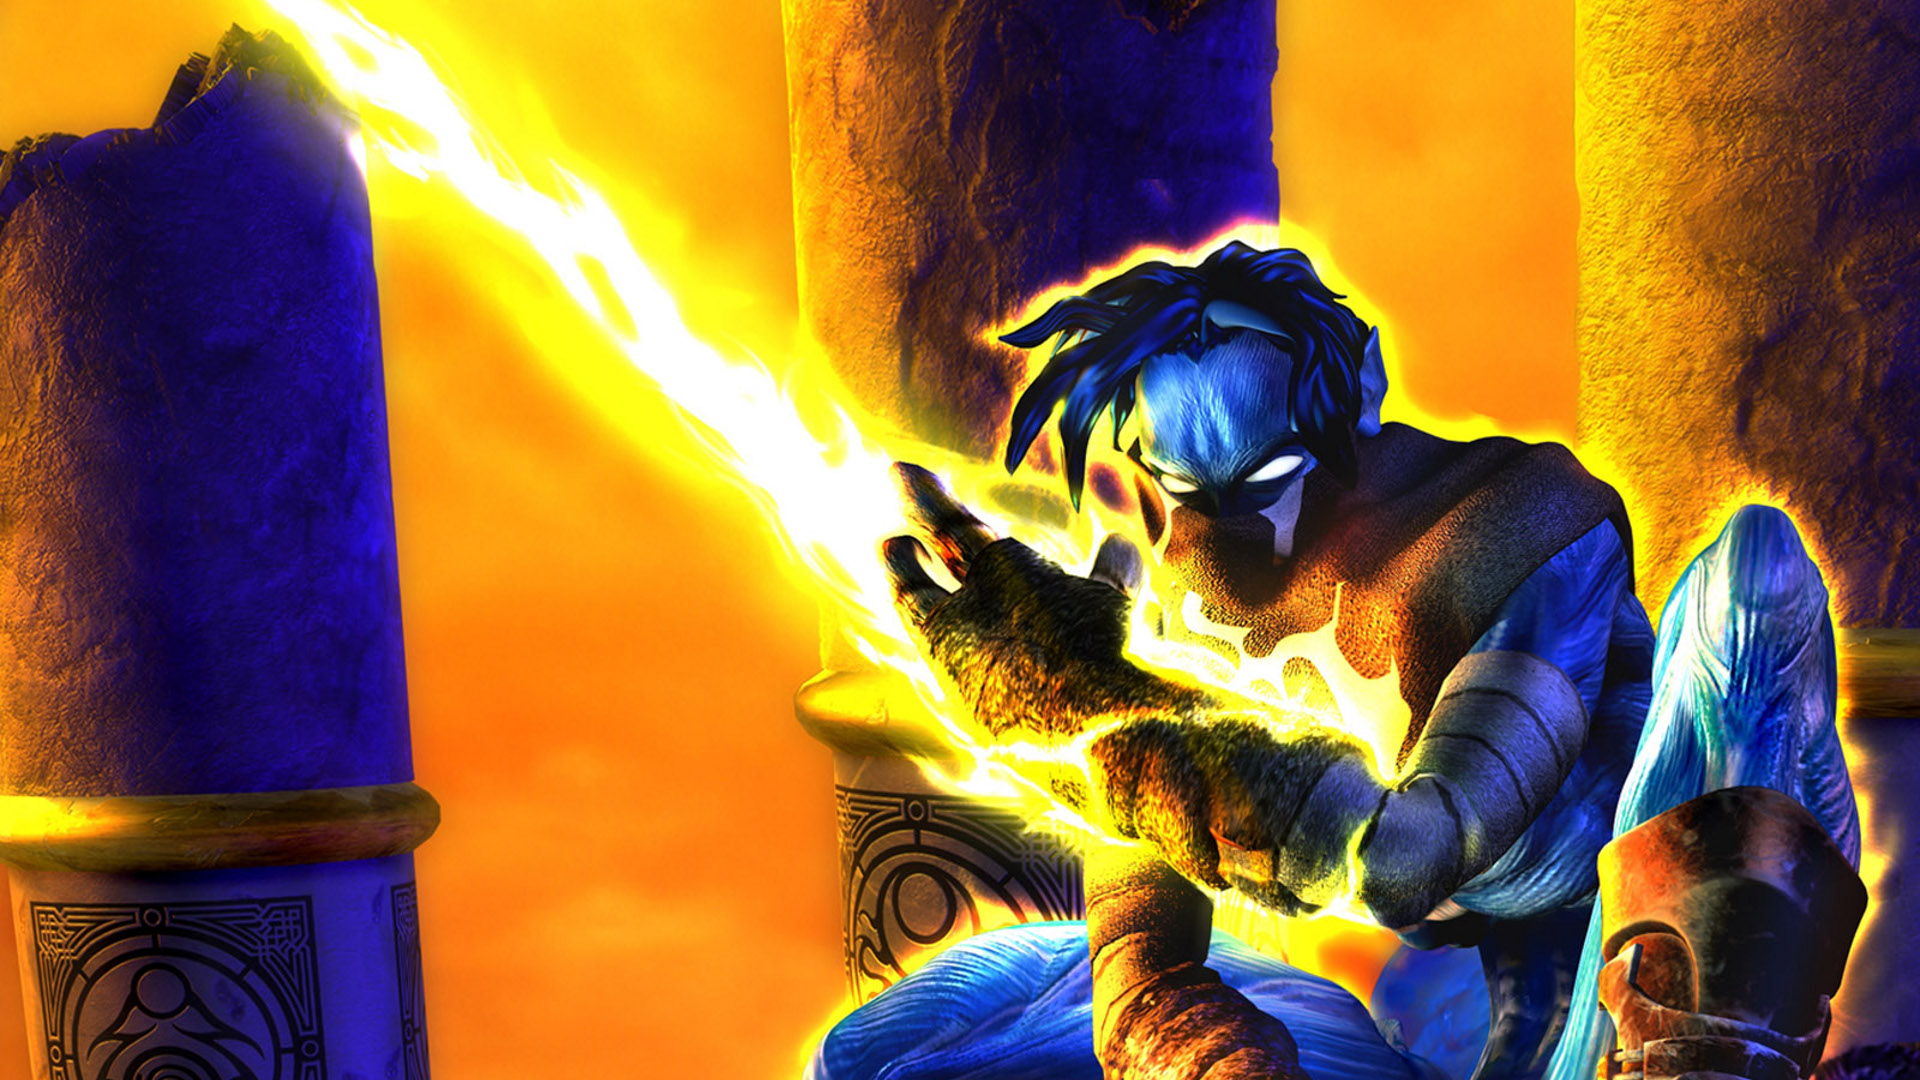 Video Game Legacy of Kain: Soul Reaver 2 HD Wallpaper | Background Image